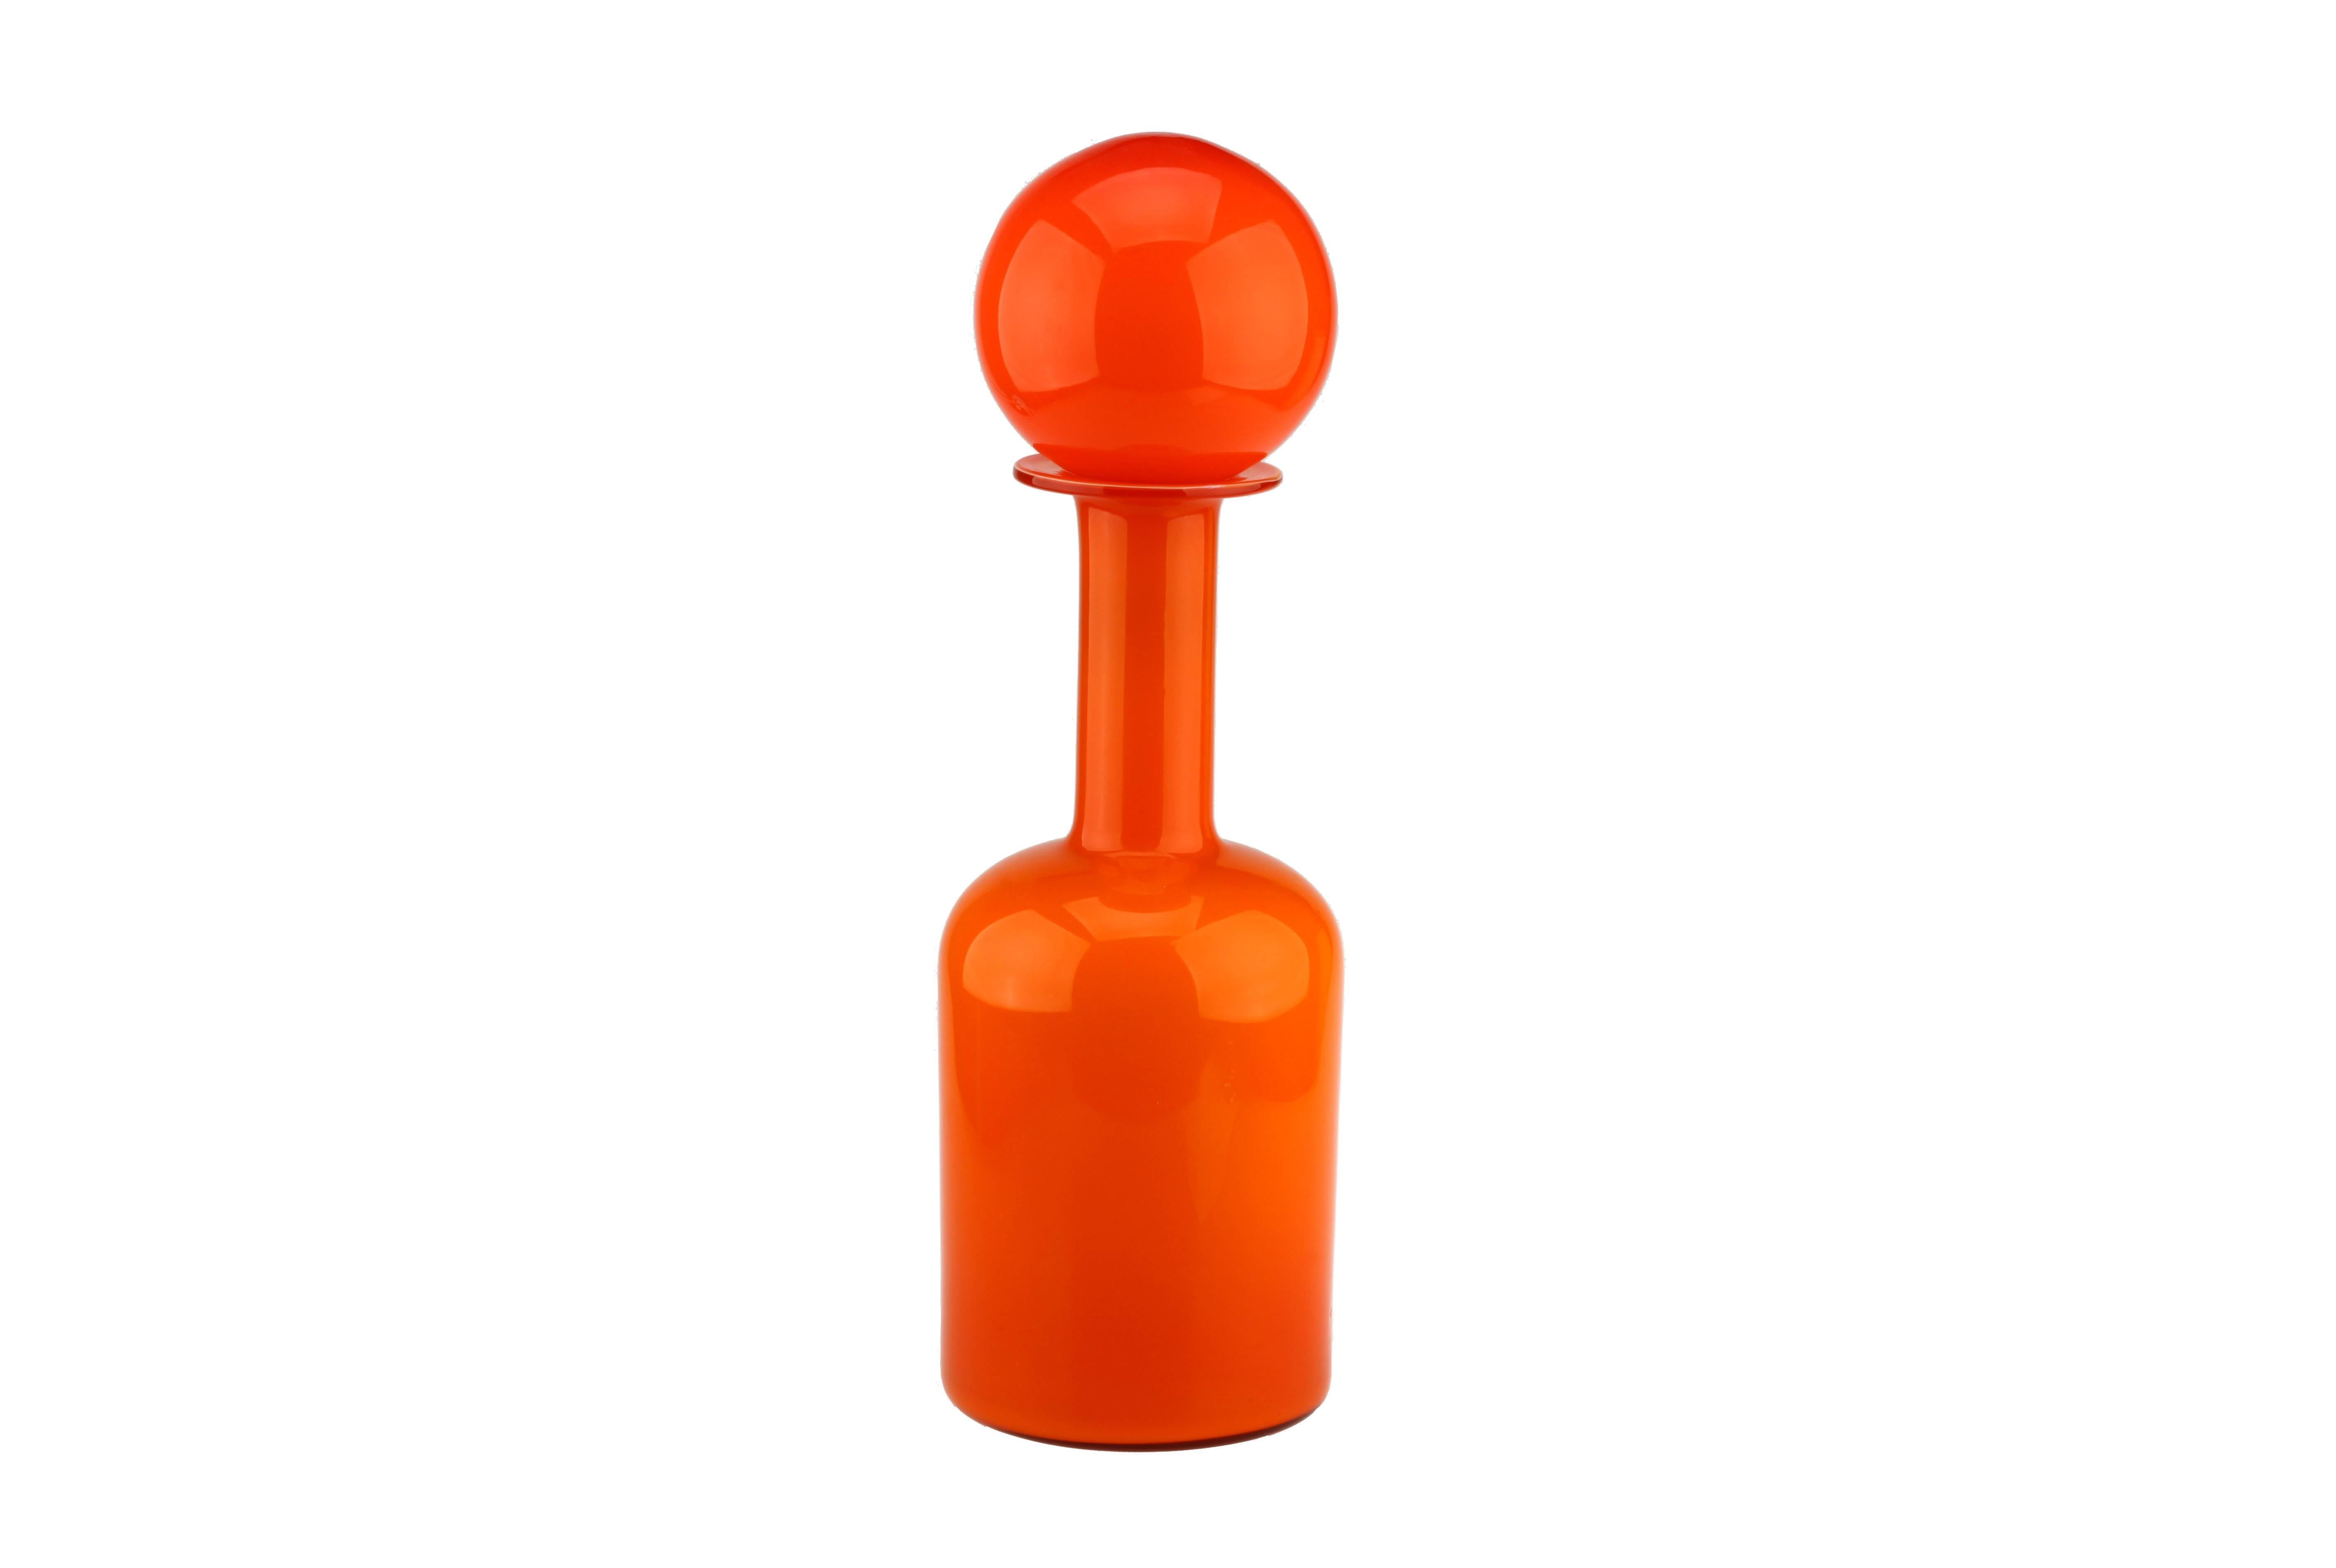 Holmegaard Sweden art glass Gulvase. Designed by Otto Brauer, 1960s. Scandinavian vintage design art glass.
An orange-colored vase in beautiful and good condition, gives off various shades of orange depending on the light. This stopper vase is also